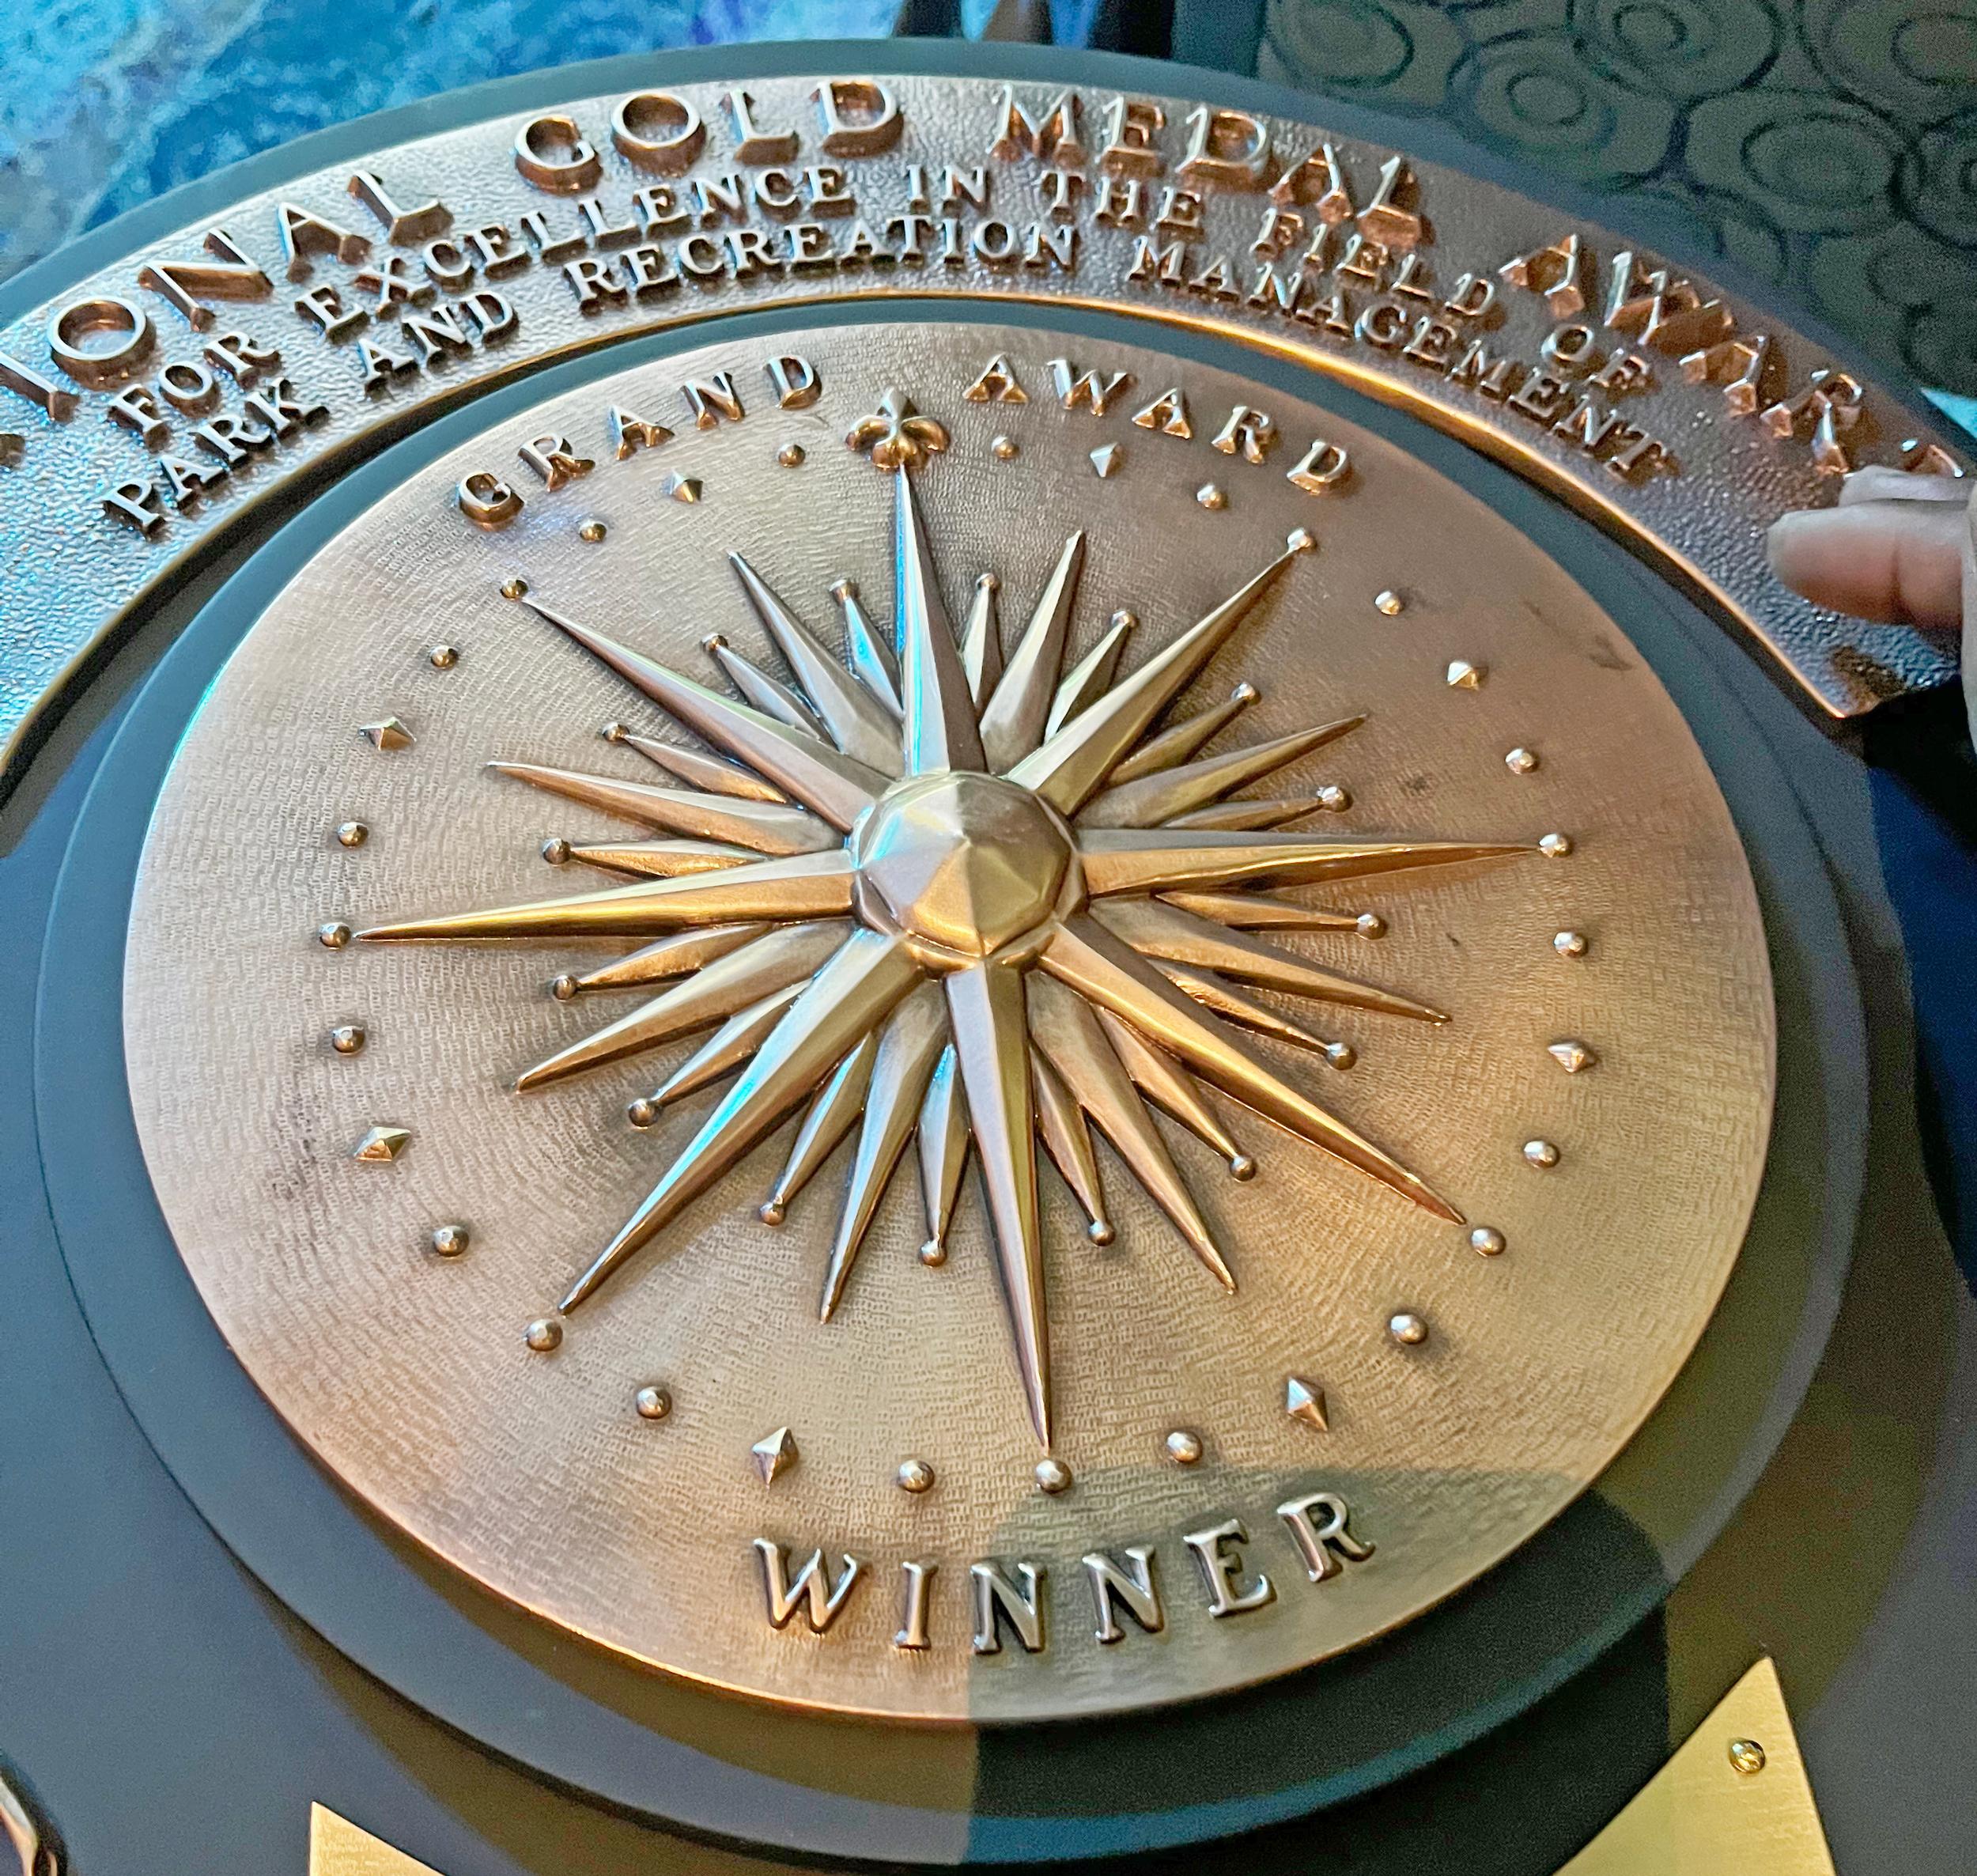 Close-up of gold medal winner plaque with metal engravings